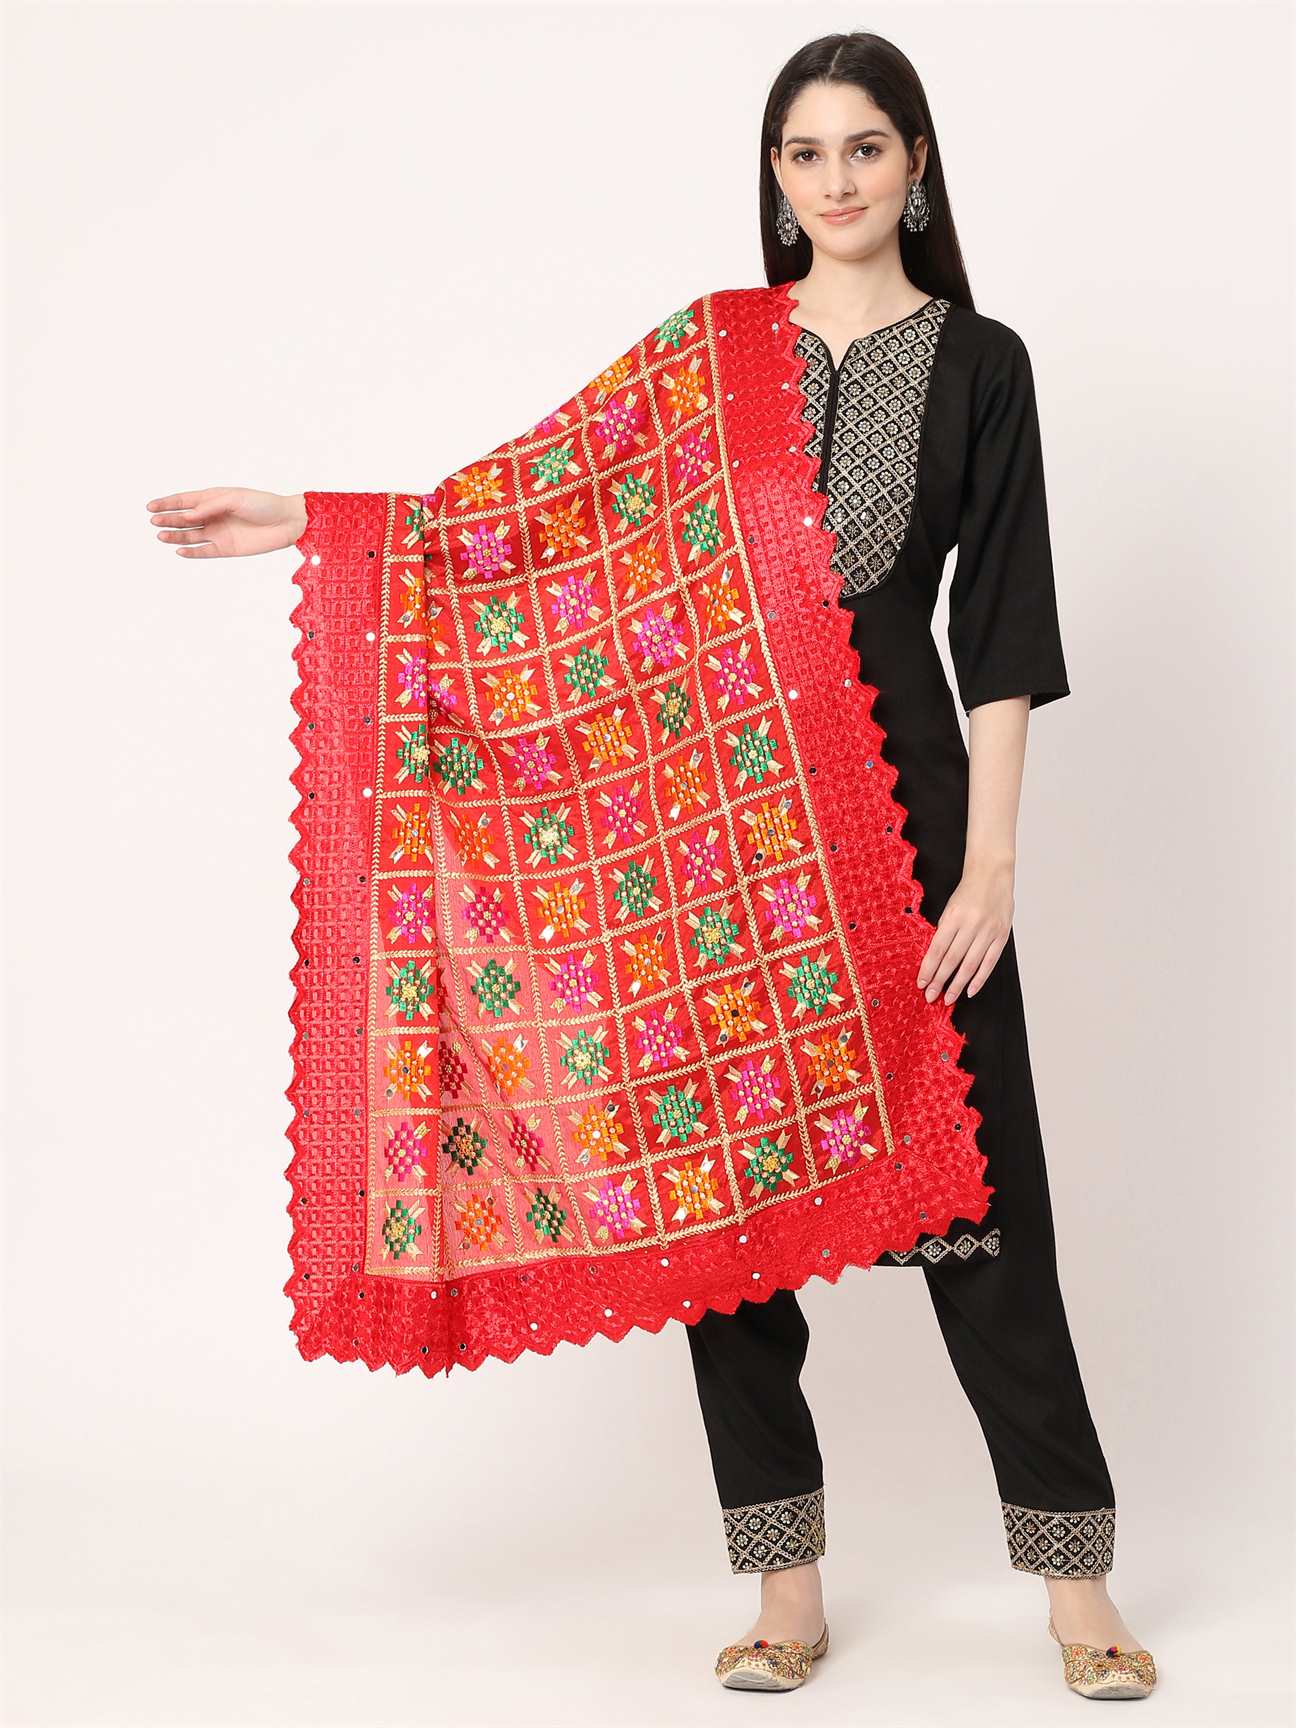 red-multicolour-embroidery-phulkari-dupatta-with-golden-beads-MCRCPD0144